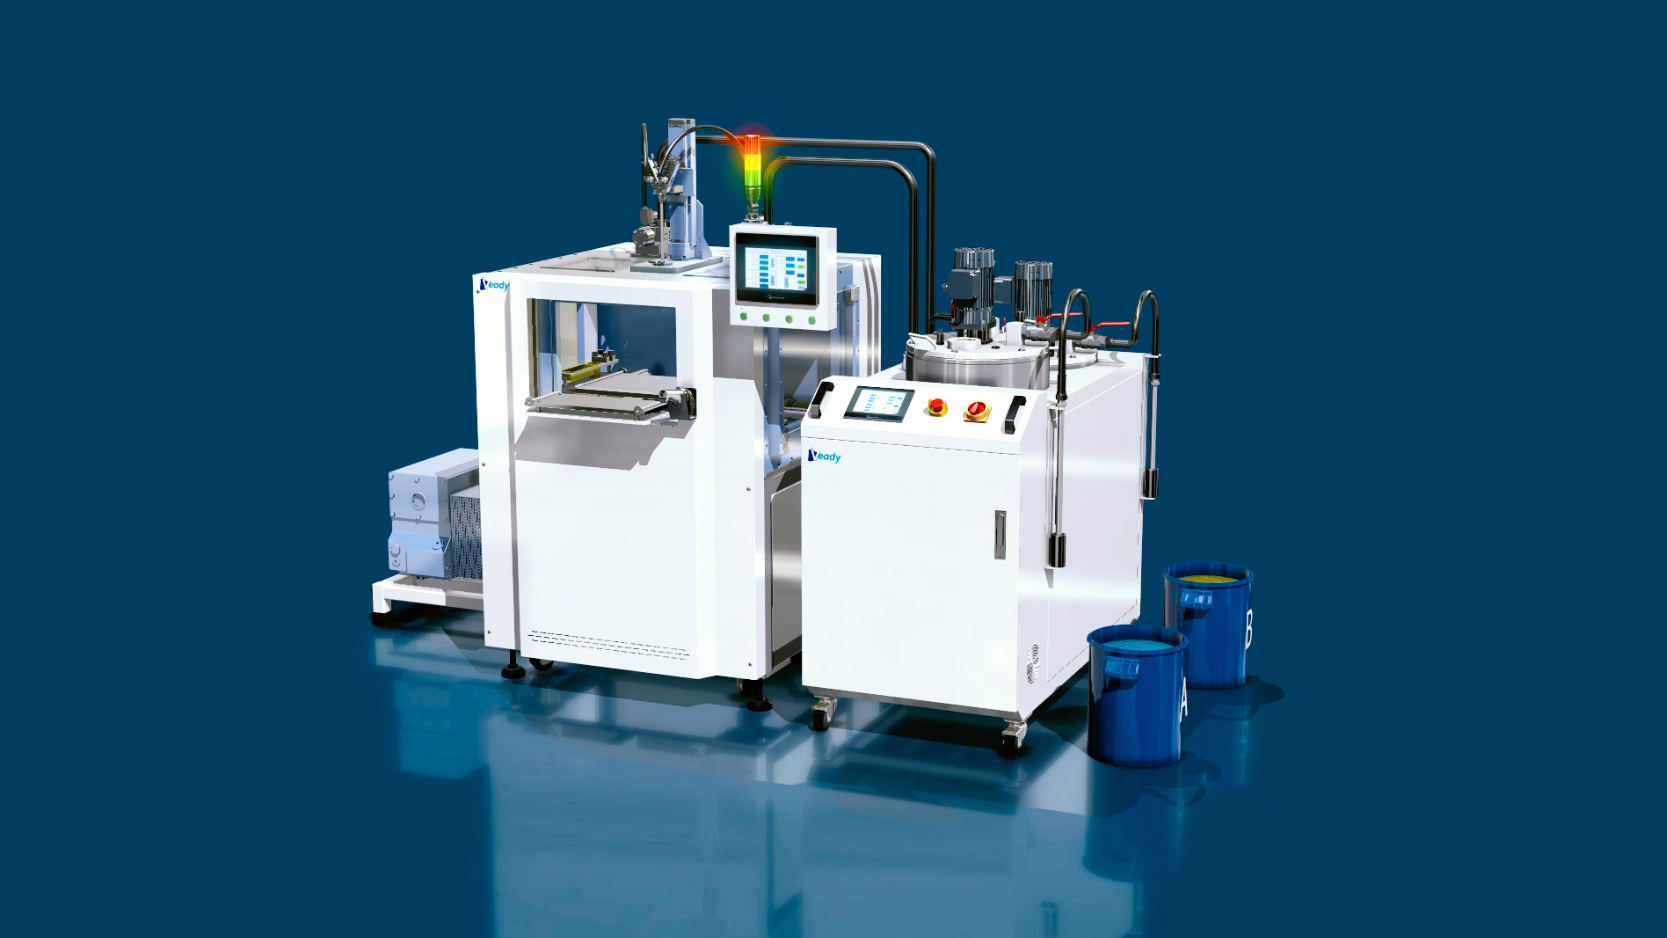 Animated demonstration of the working principle of Veady offline vacuum glue filling machine